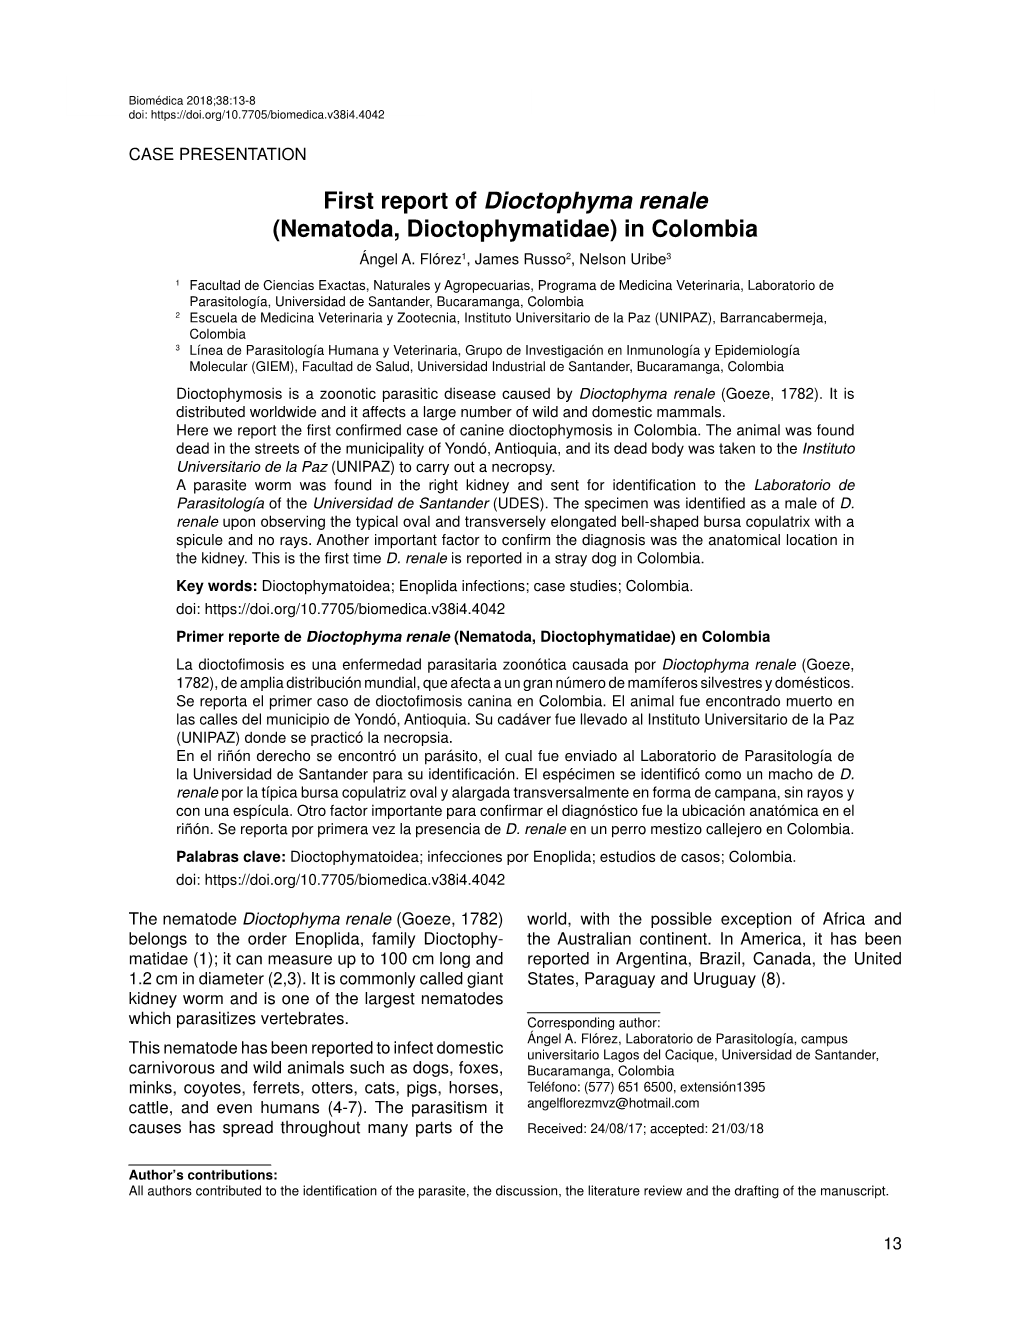 First Report of Dioctophyma Renale in Colombia Doi